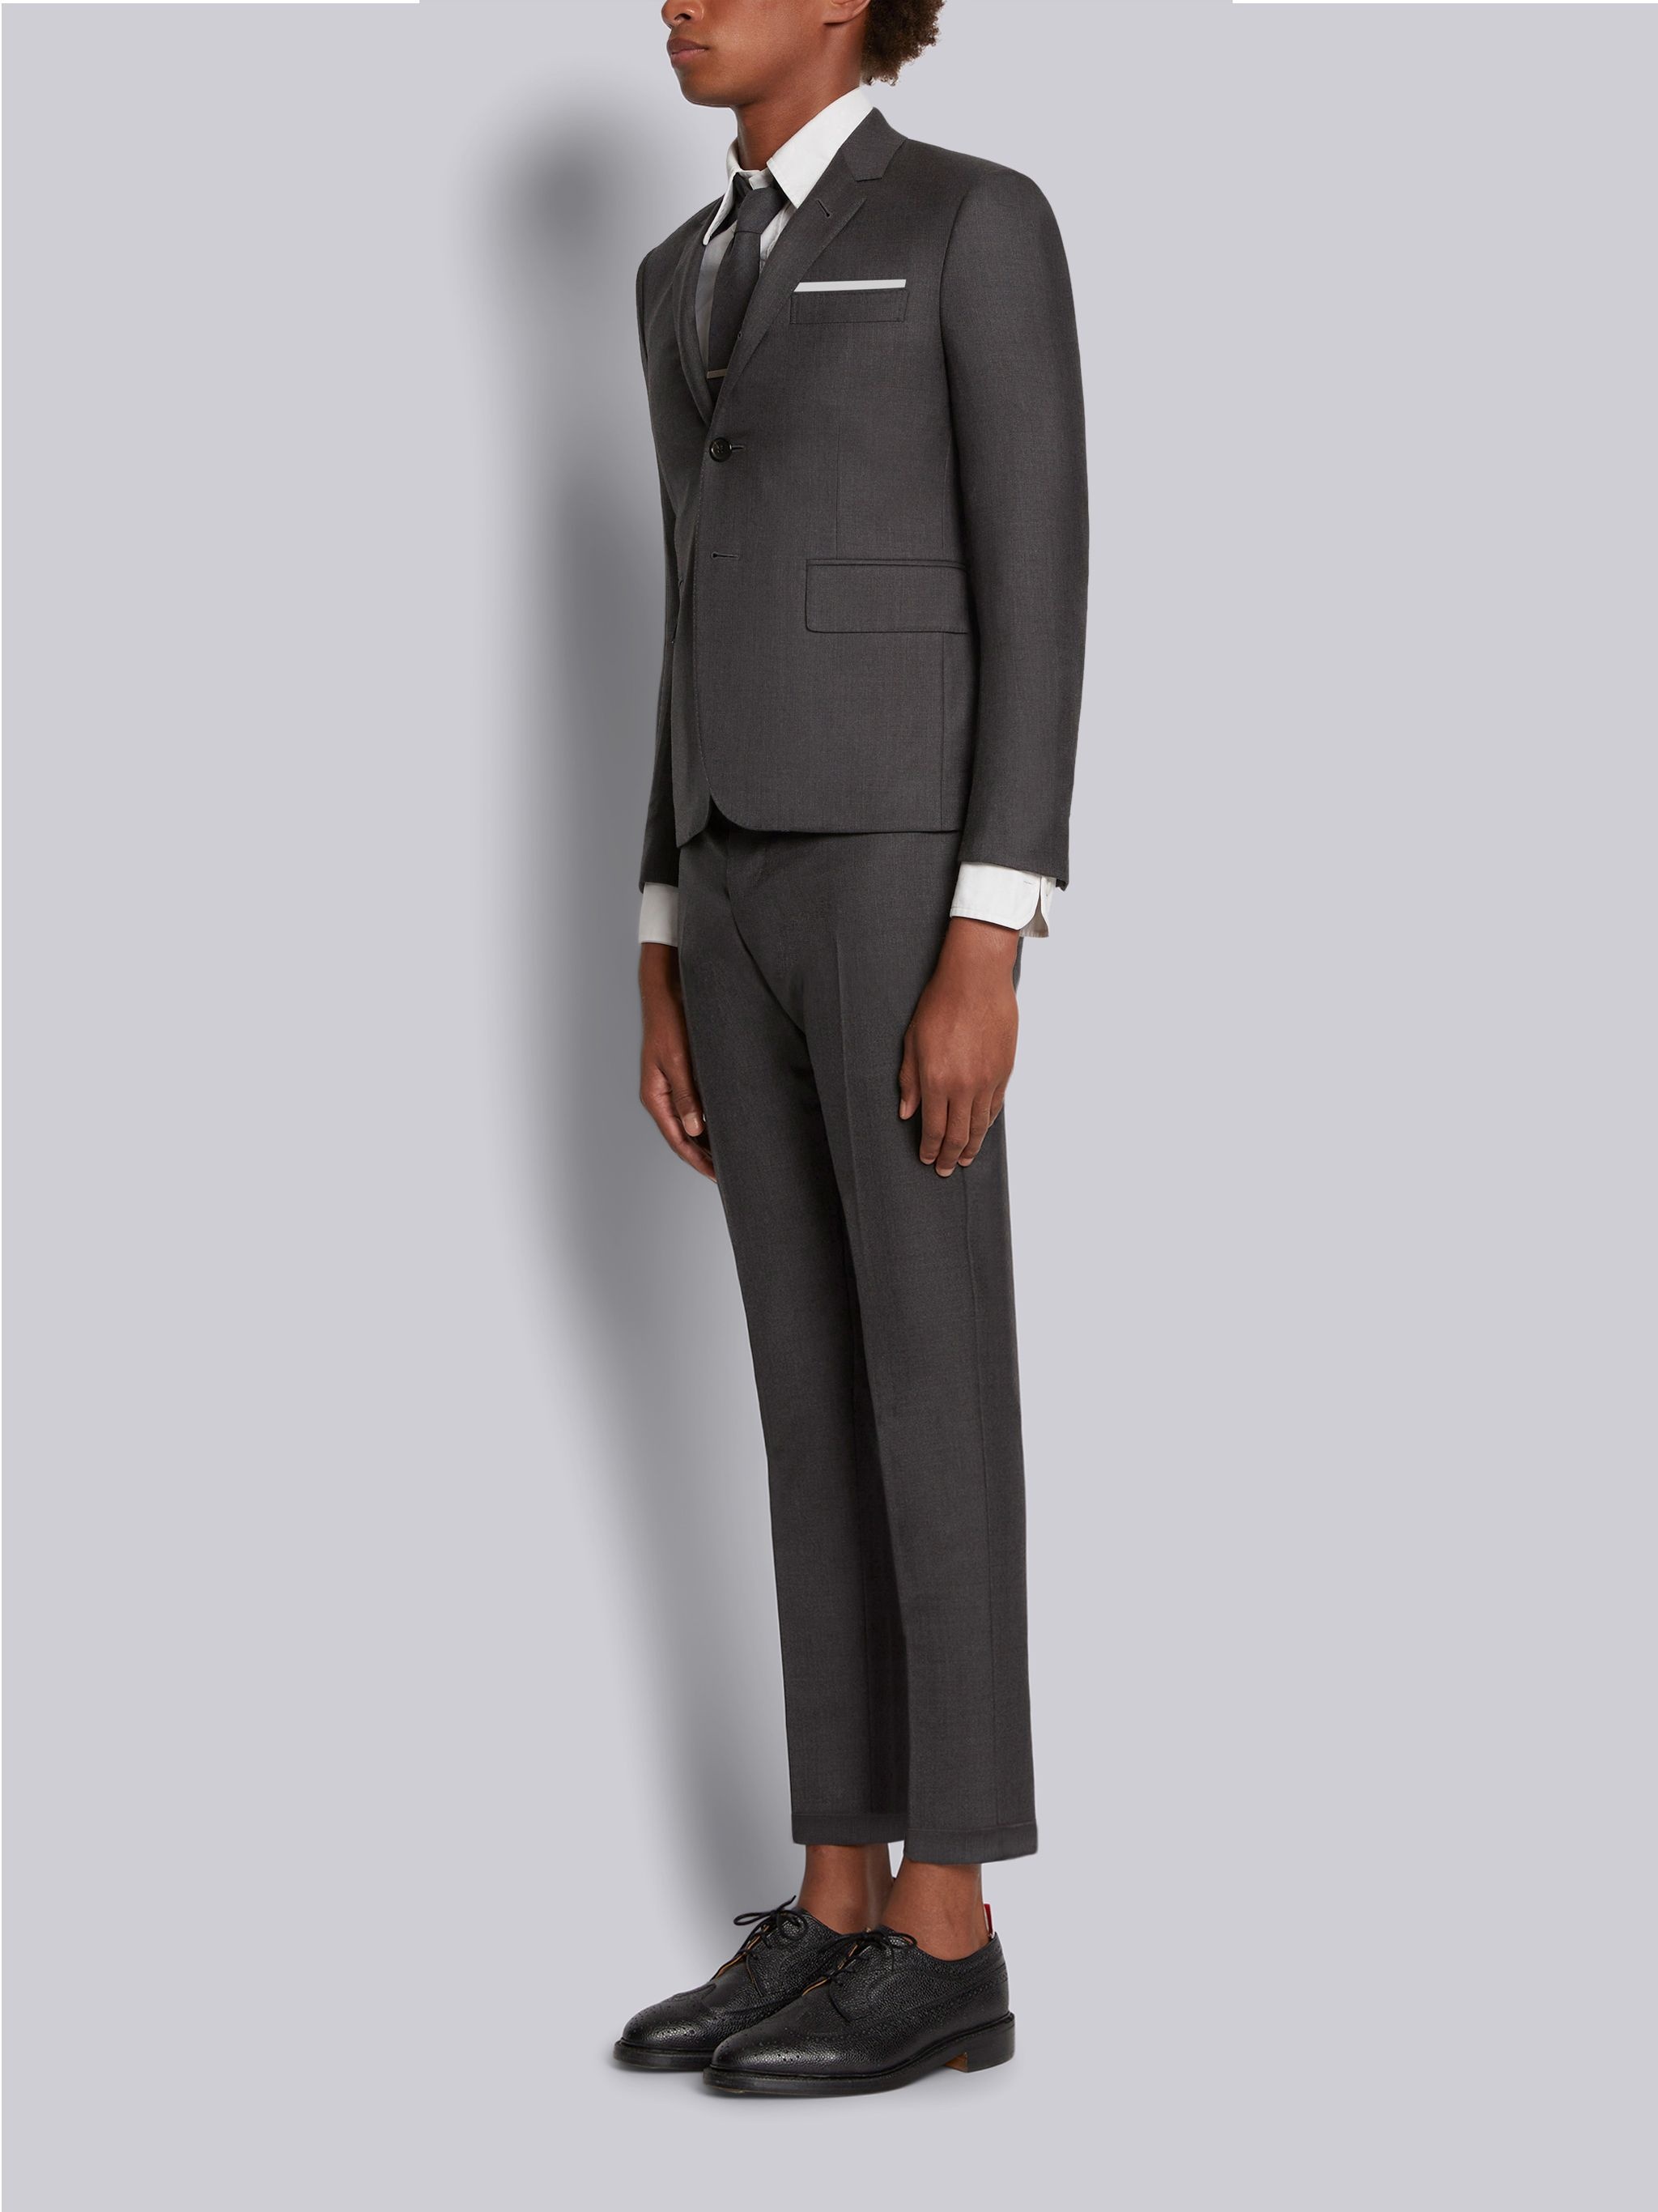 Dark Grey Super 120s Twill High Armhole Suit With Tie And Low Rise Skinny Trouser - 2